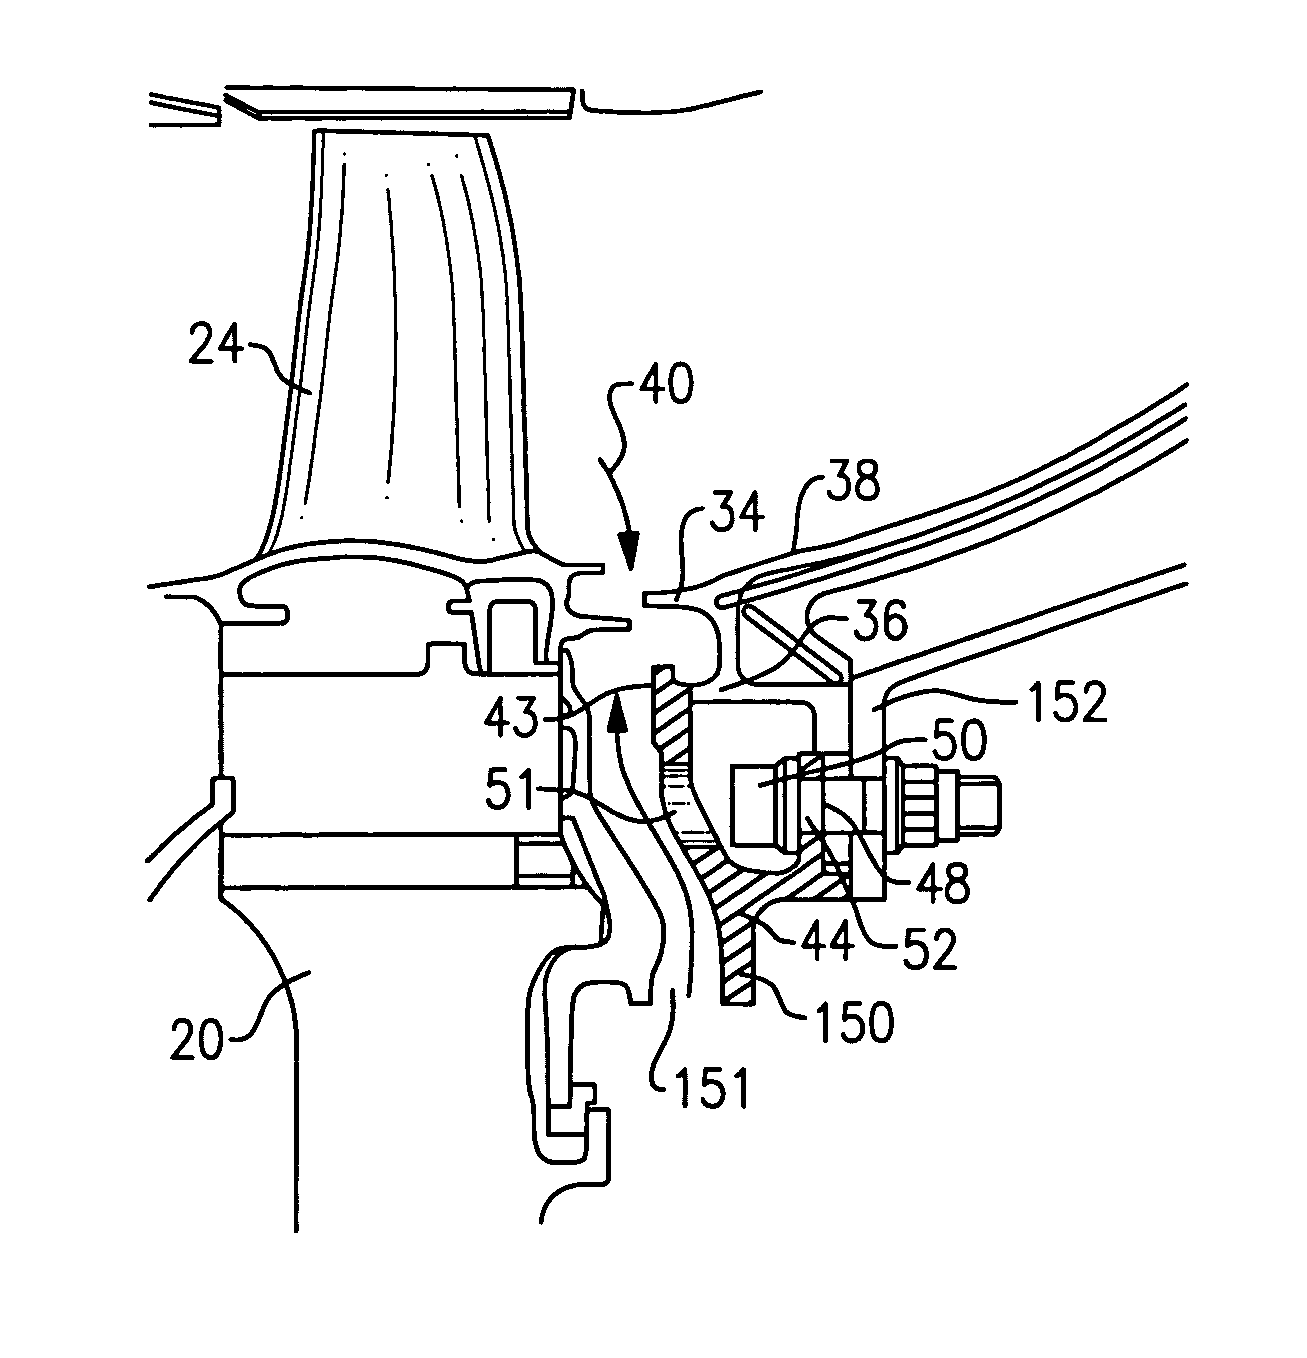 Gas turbine engine with purge air pump and guide